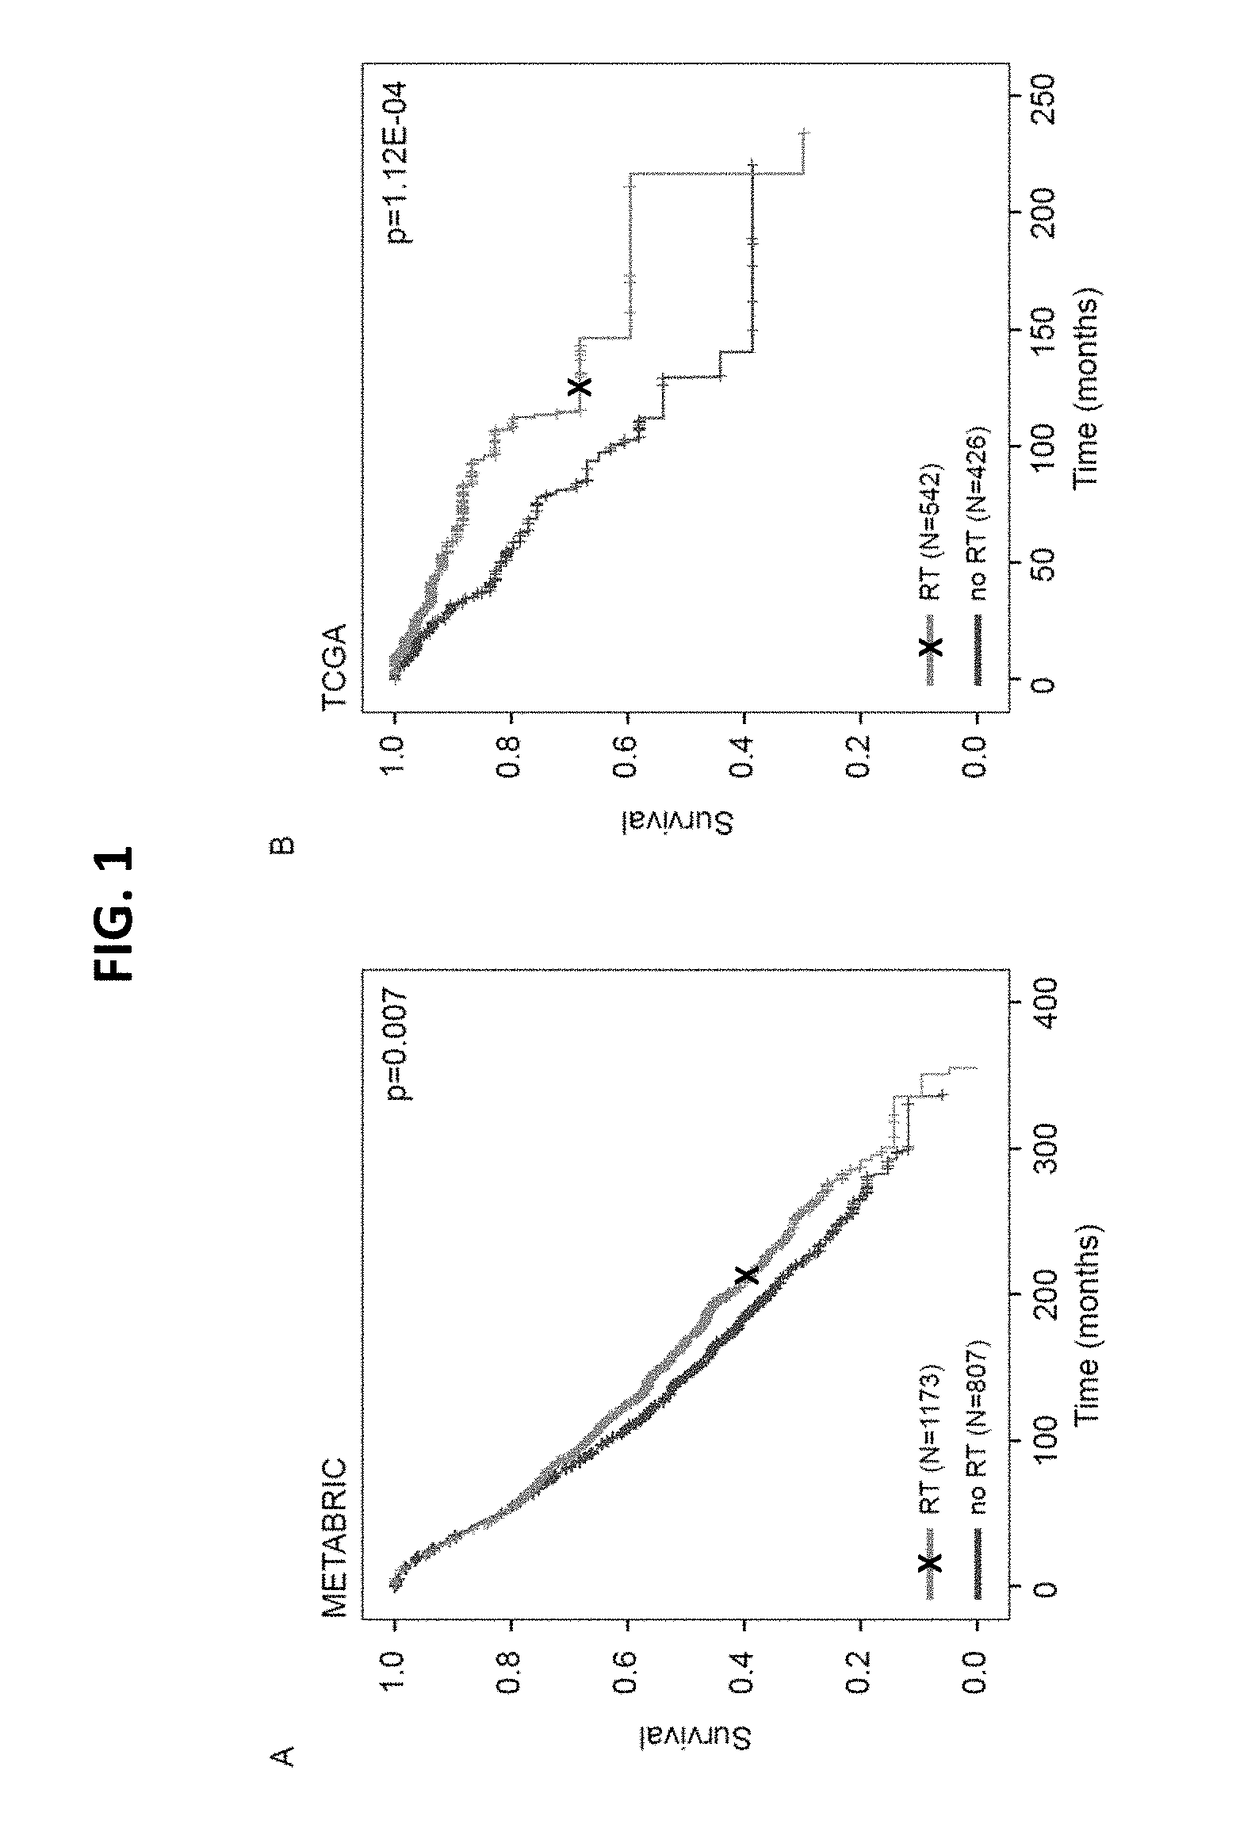 Methods of Producing Gene Expression Profiles of Subjects Having Cancer and Kits for Practicing Same